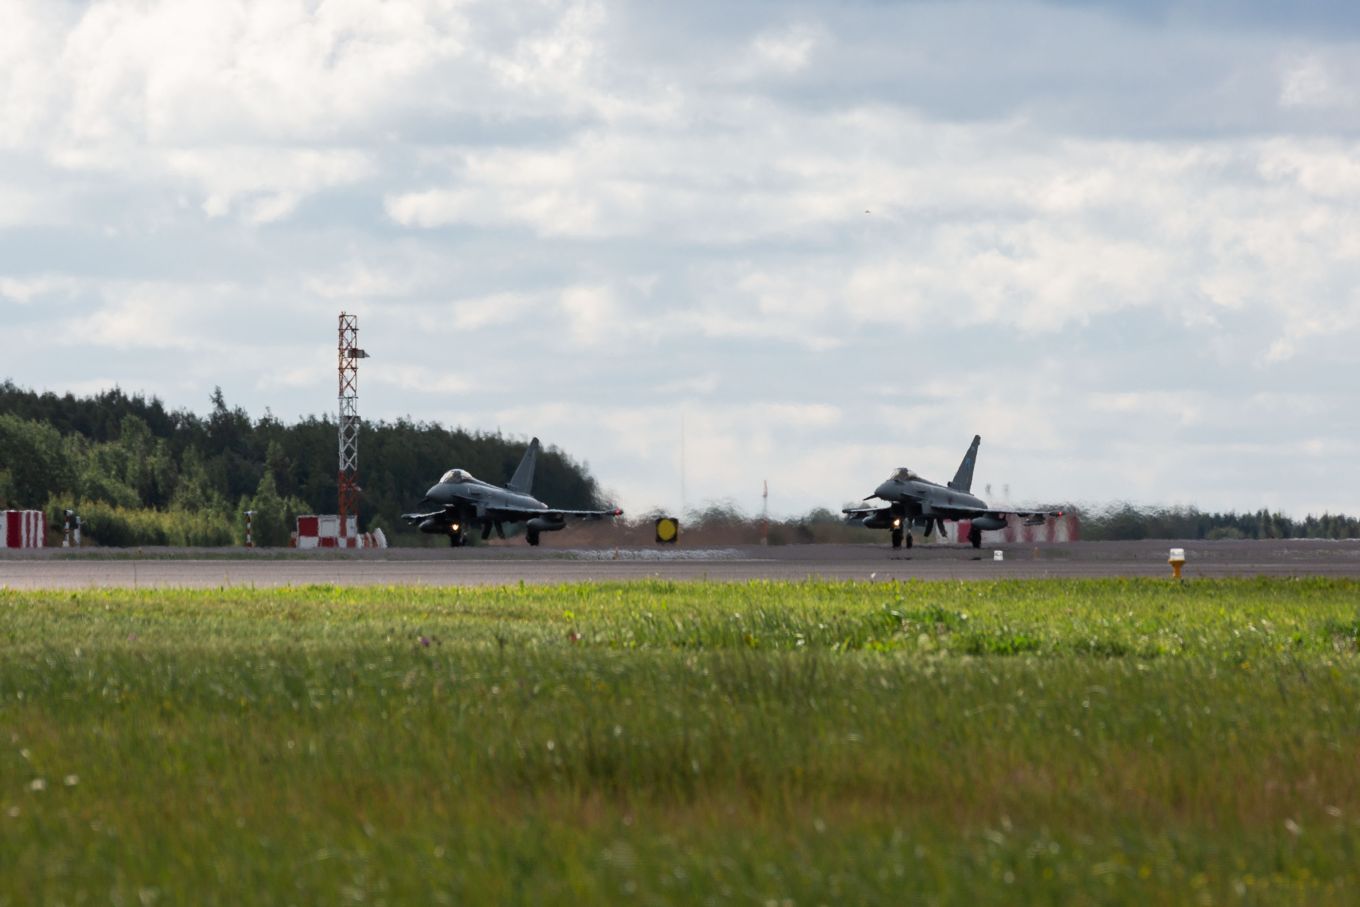 Image shows an RAF Typhoon and a German Eurofighter taxiing on the runway.